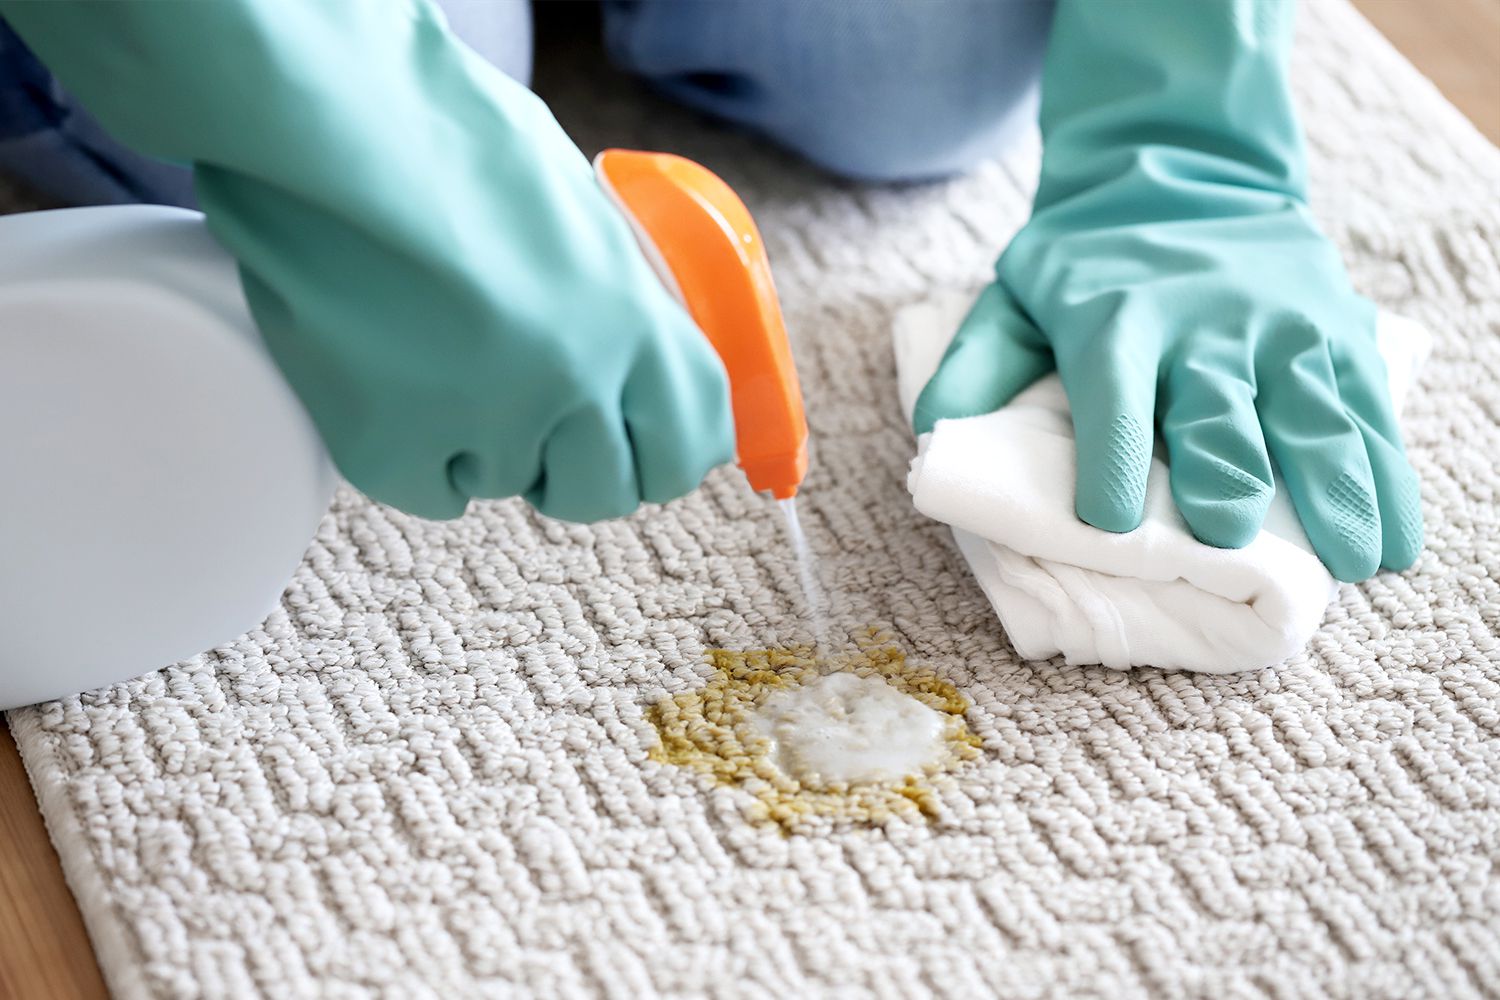 How To Clean Puke Out Of A Rug